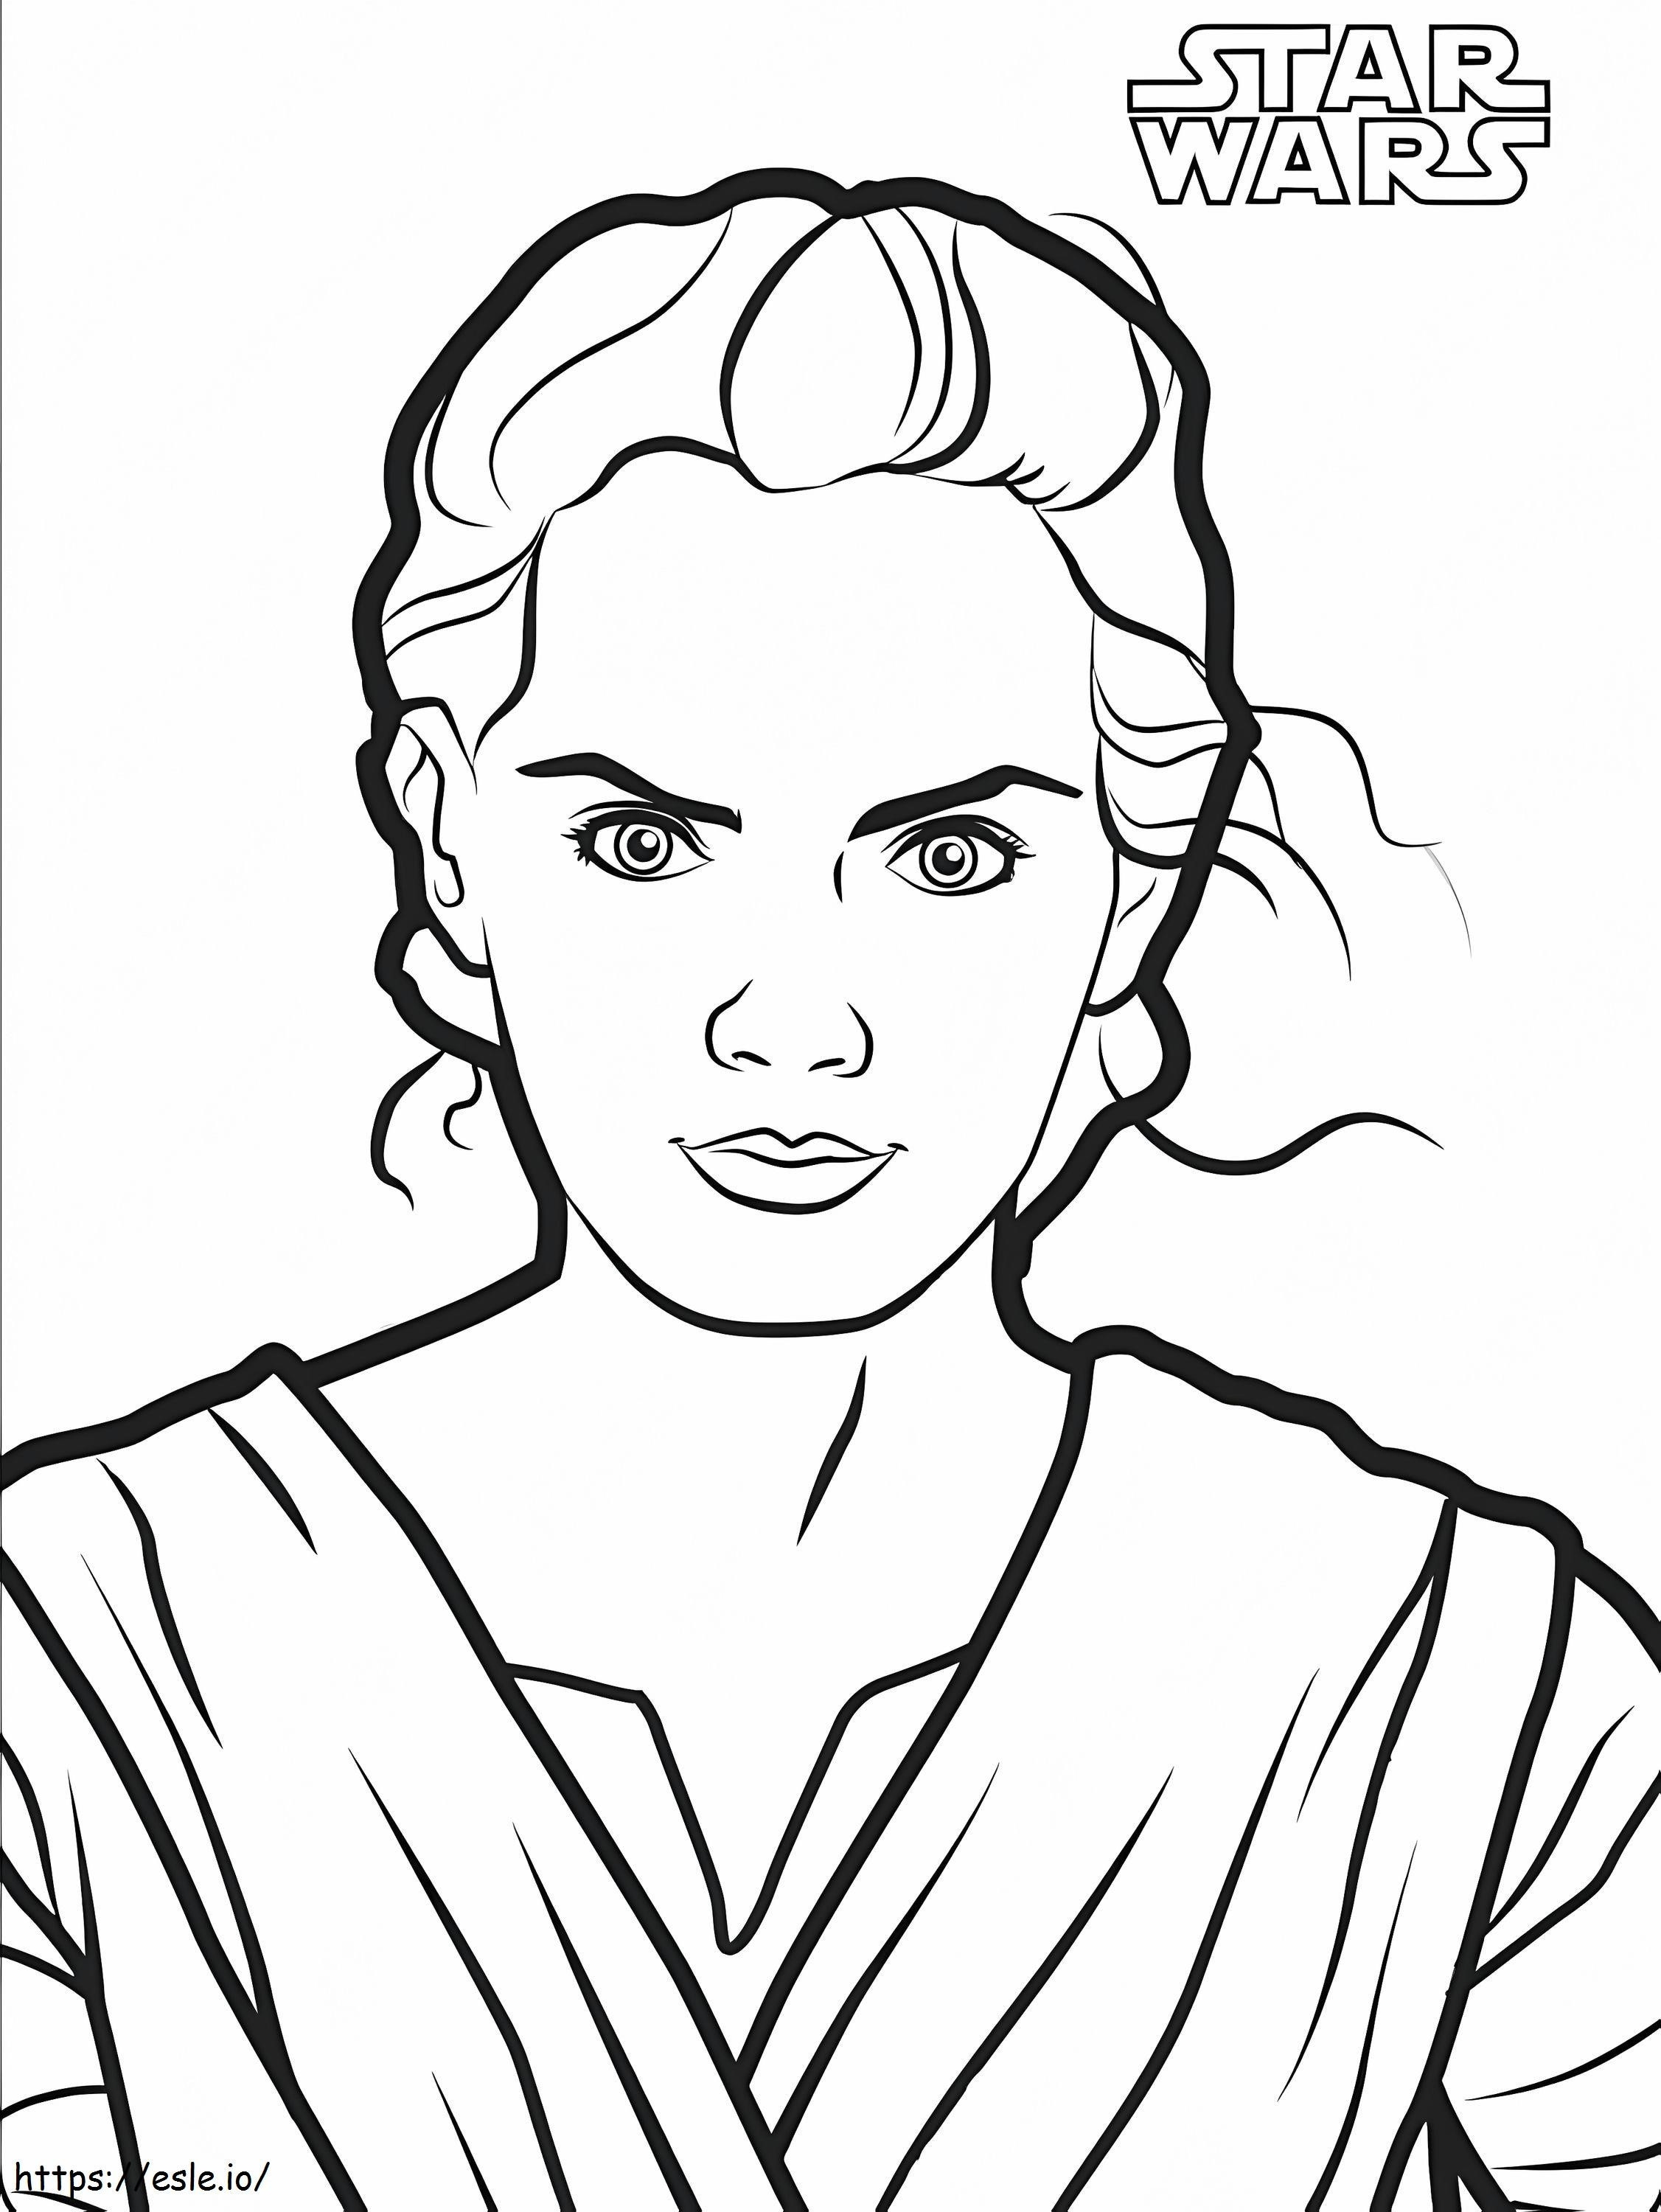 Reys Face coloring page